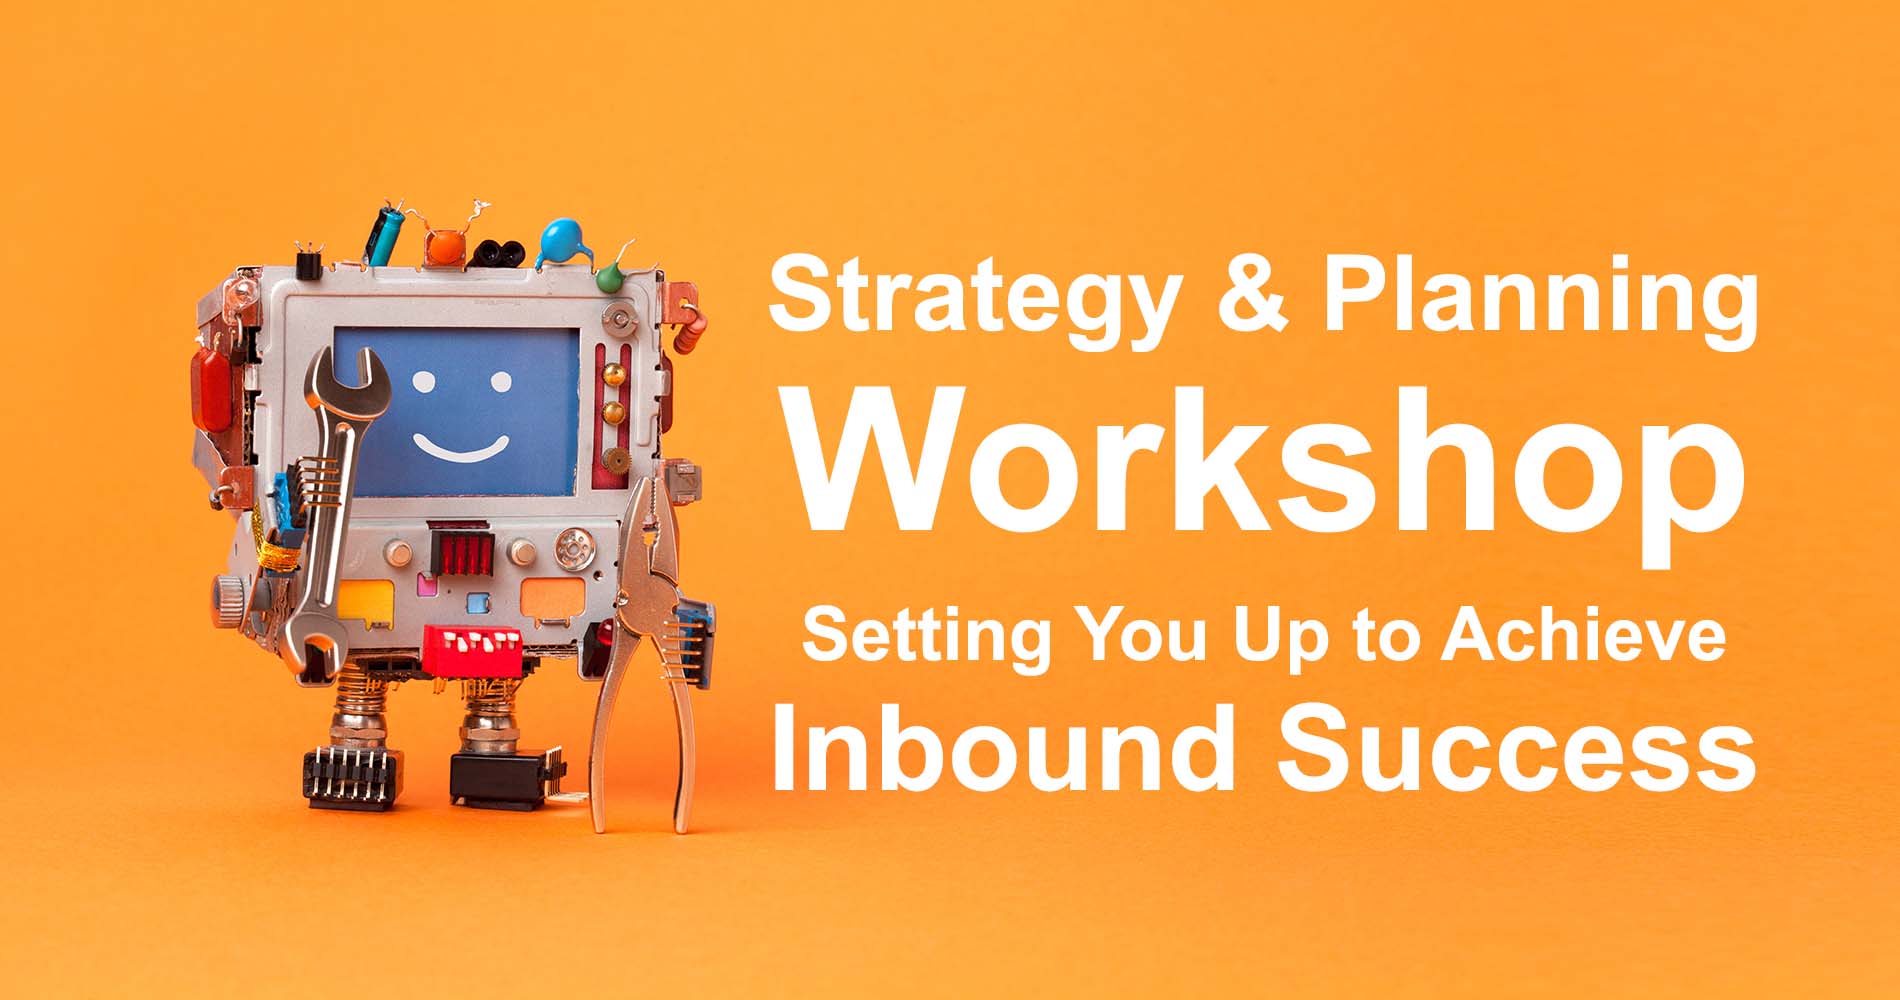 Strategy & Planning Workshop: Setting You Up to Achieve Inbound Success